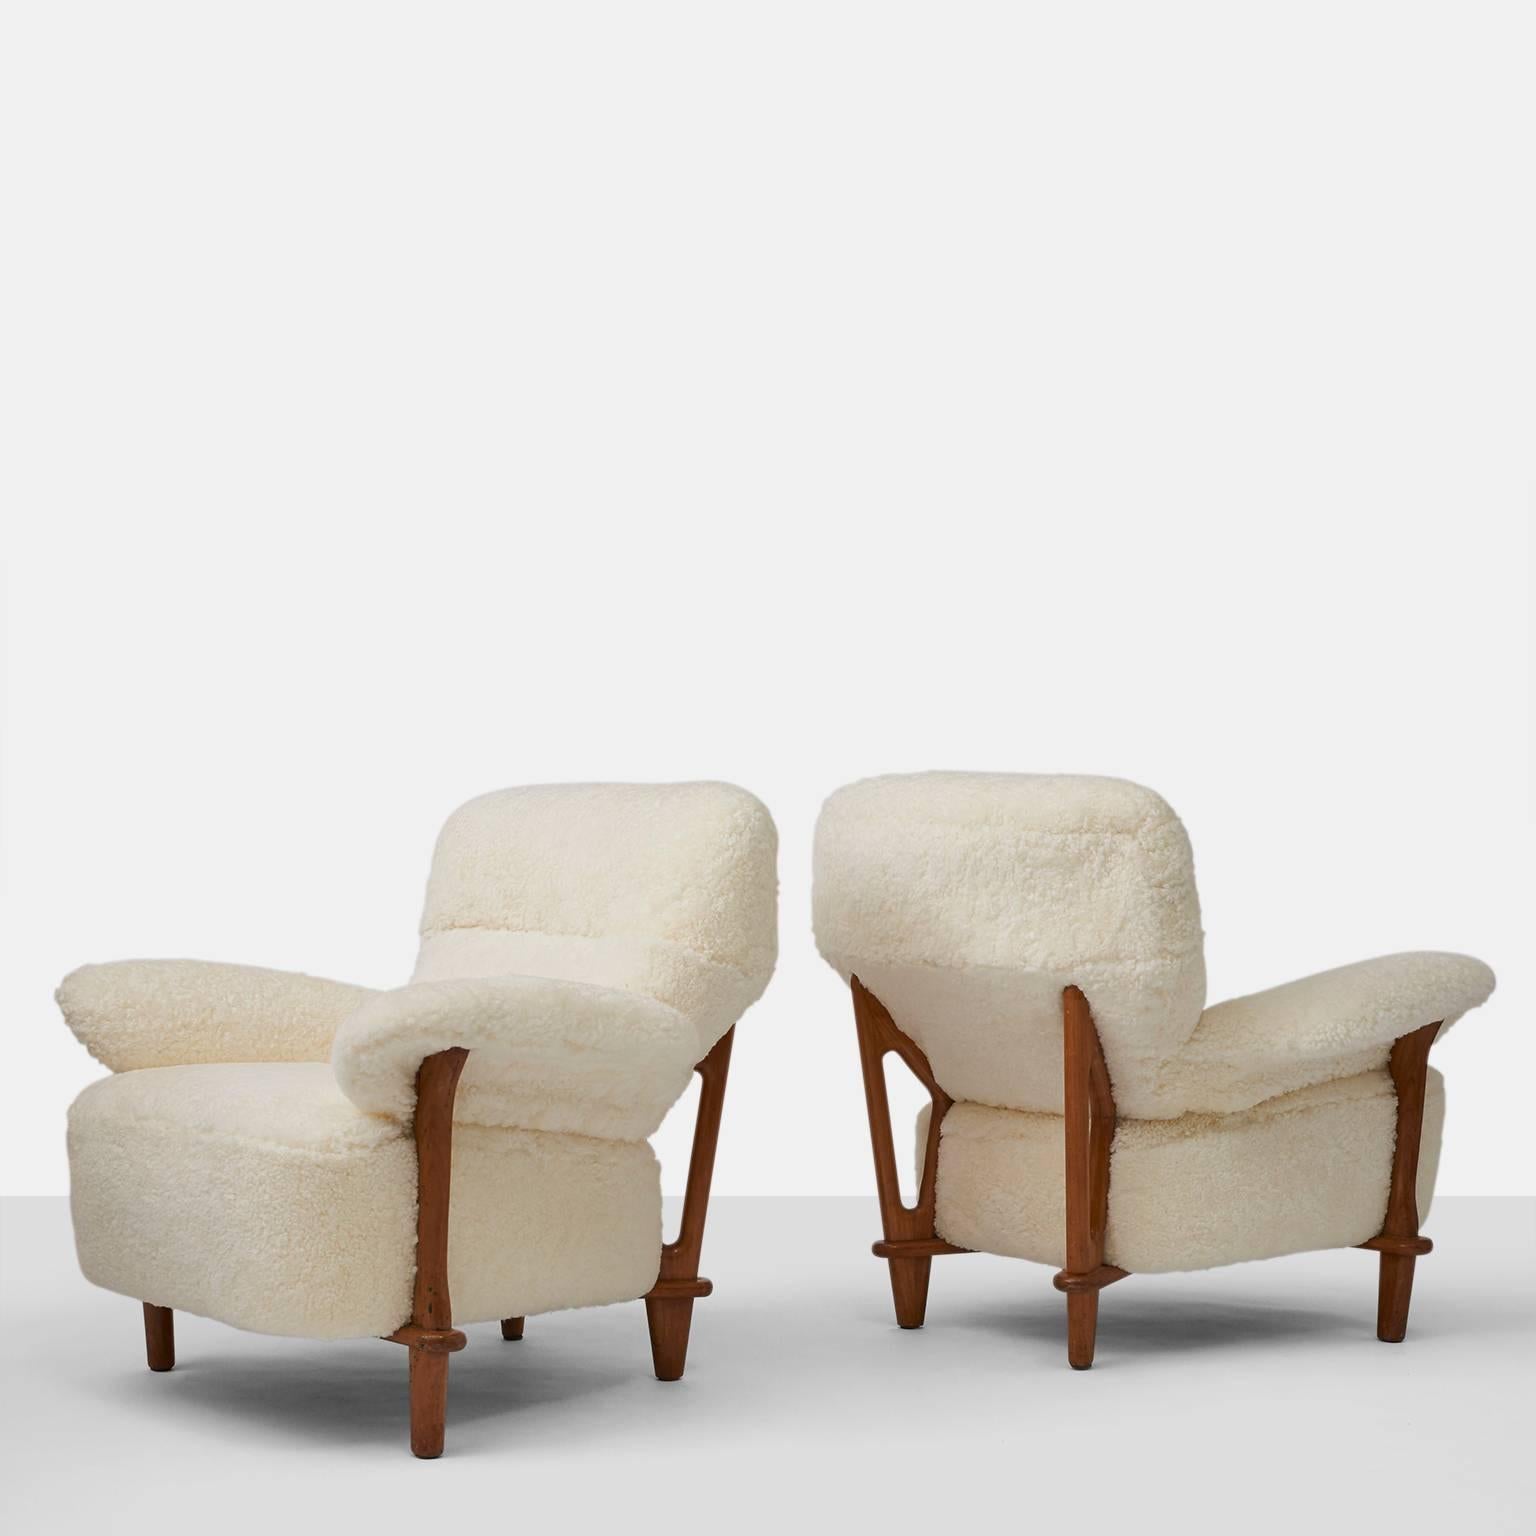 A rare pair of large scaled lounge chairs with a high back by Theo Ruth for Artifort, circa 1950. The chairs have been completely restored in a luxurious shearling.
 